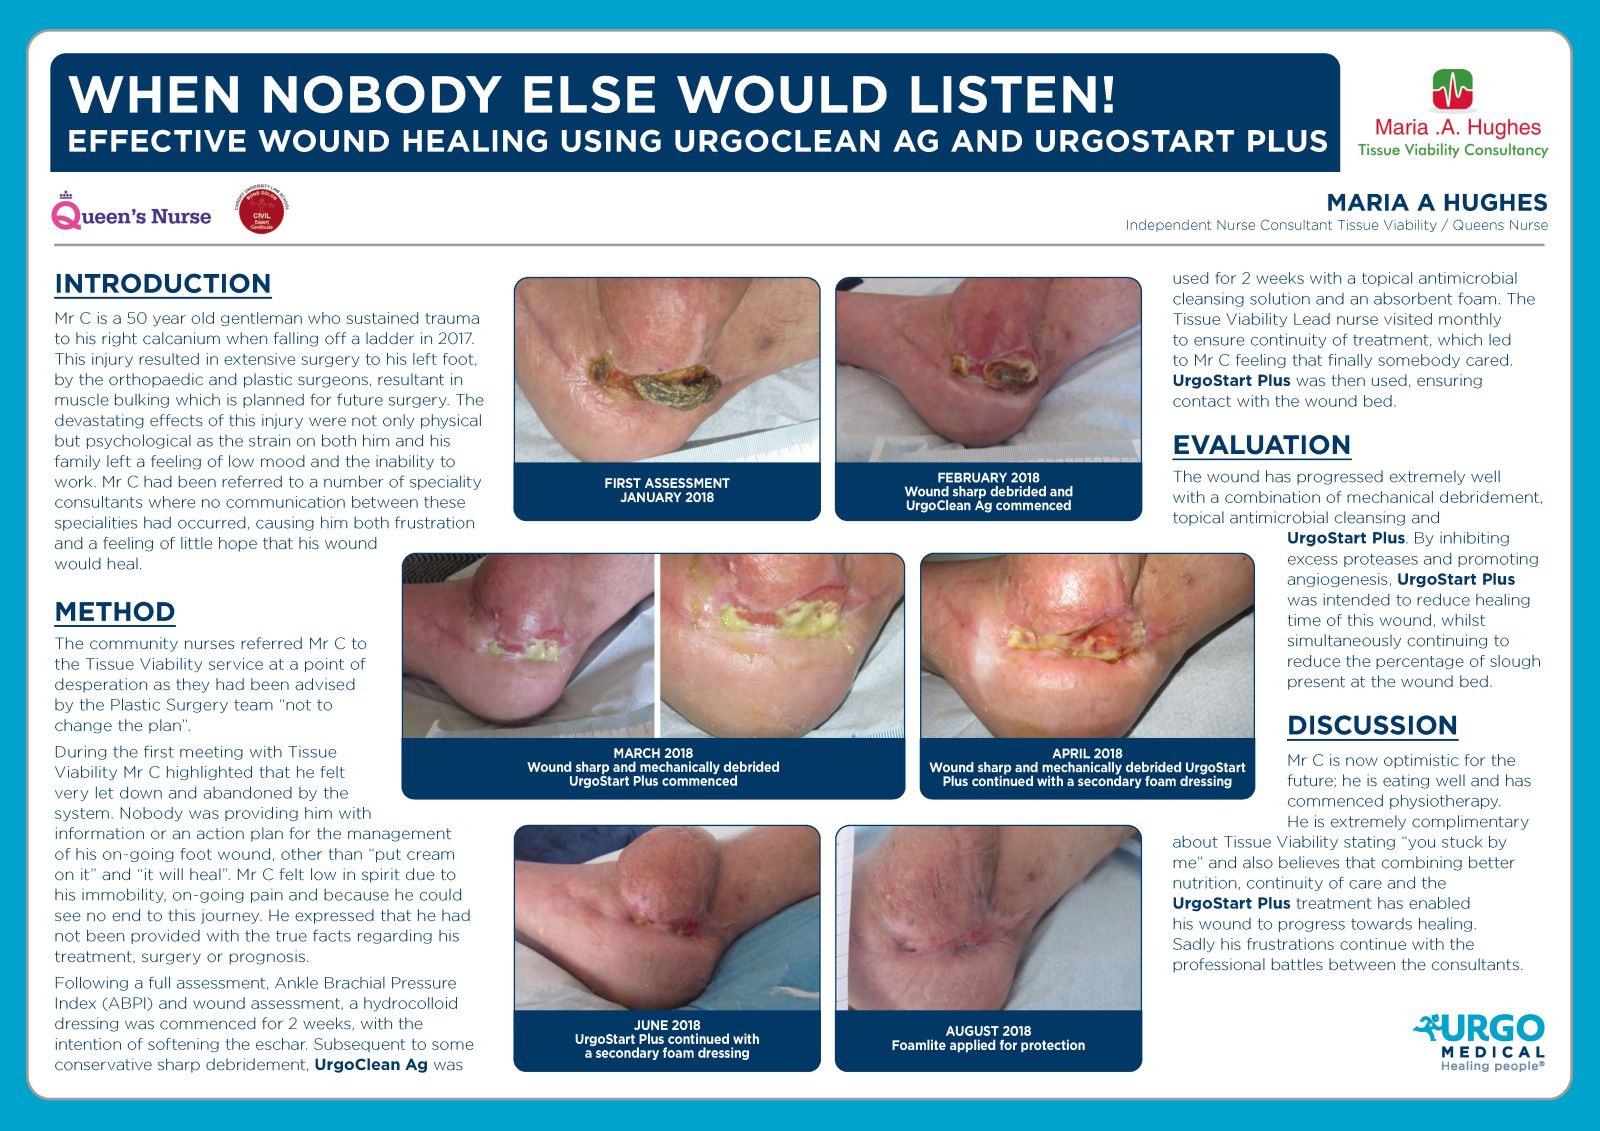 WHEN NOBODY ELSE WOULD LISTEN! EFFECTIVE WOUND HEALING USING URGOCLEAN AG AND URGOSTART PLUS